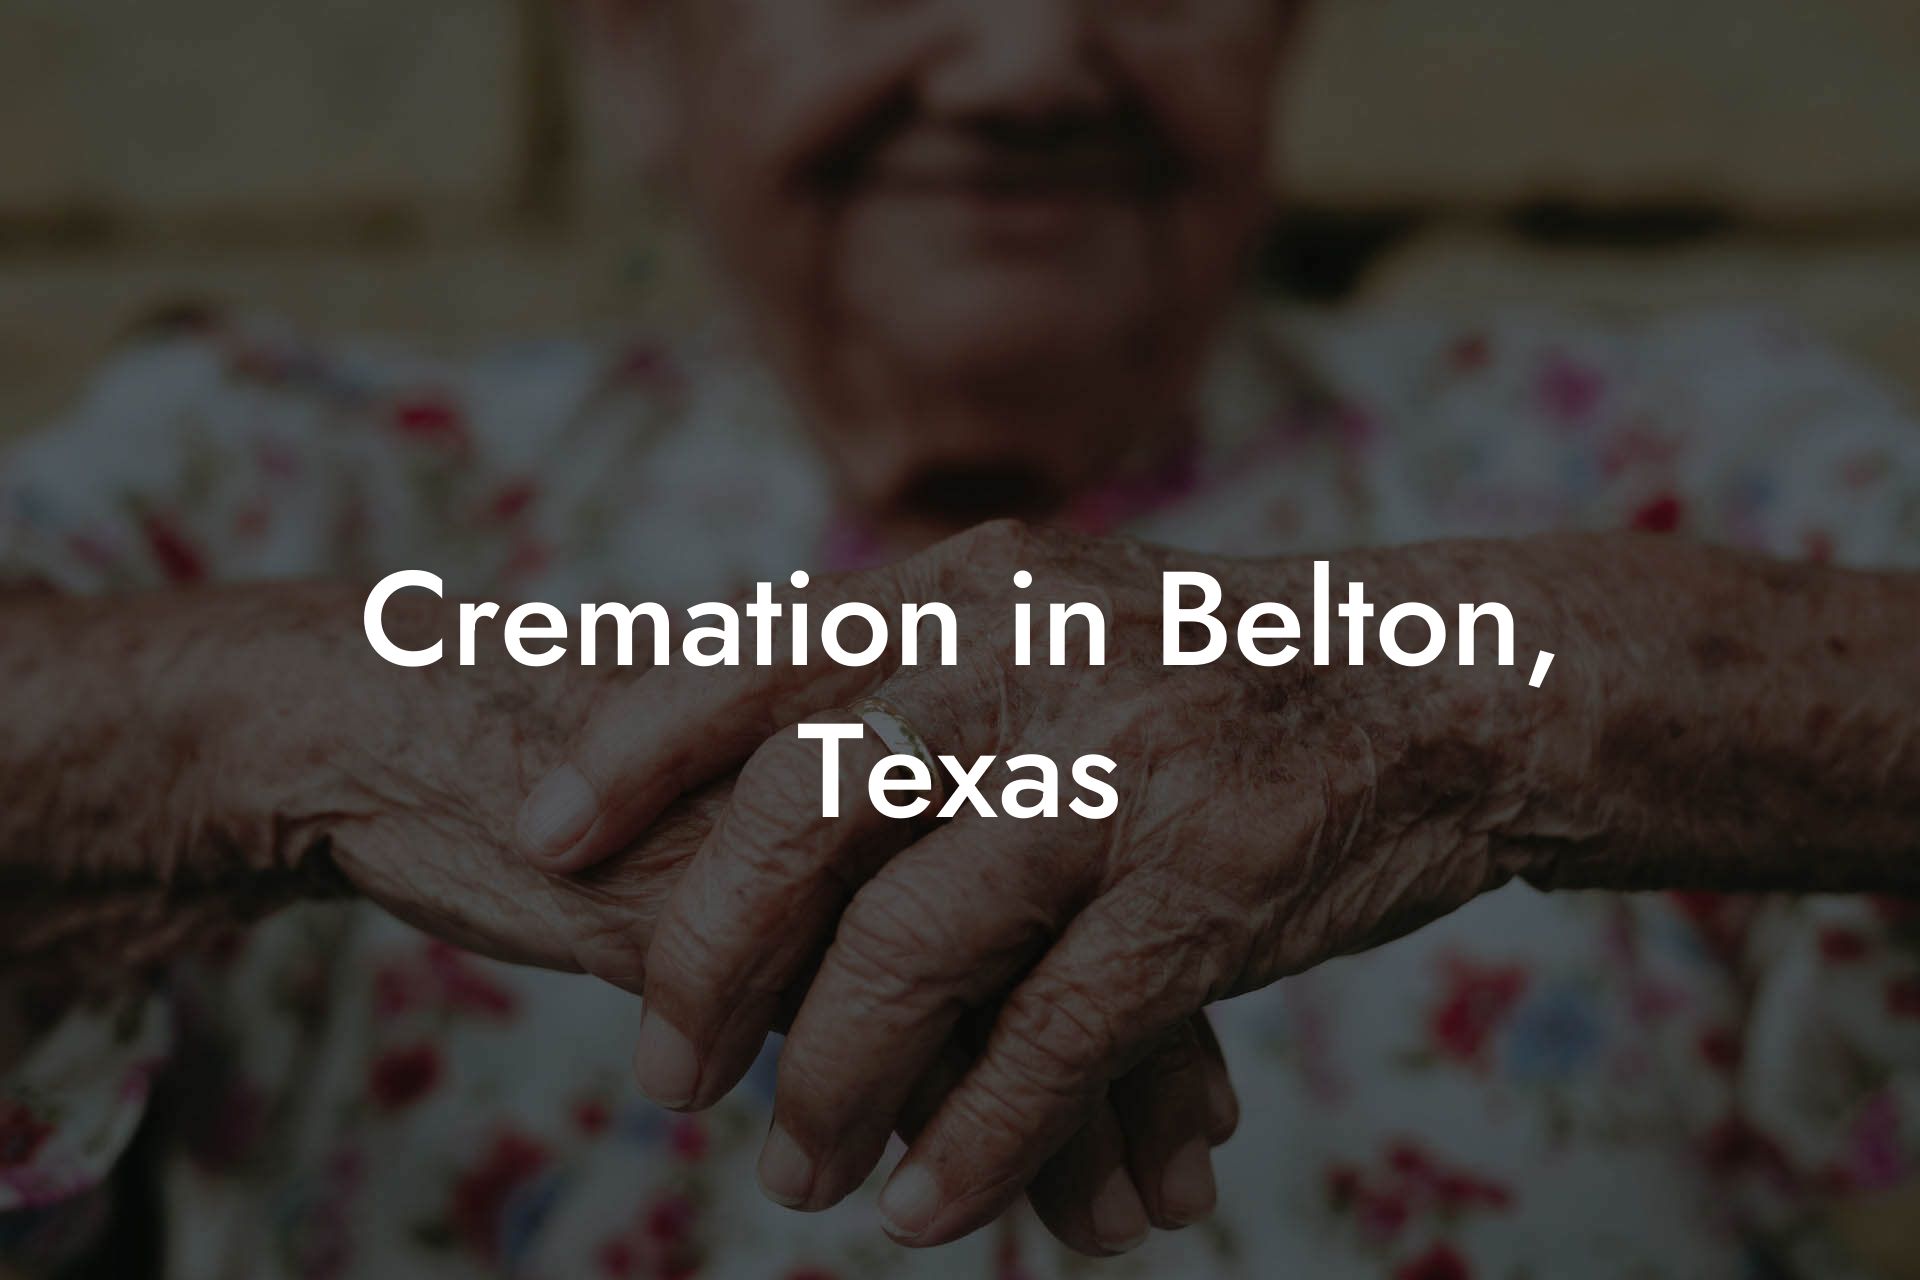 Cremation in Belton, Texas